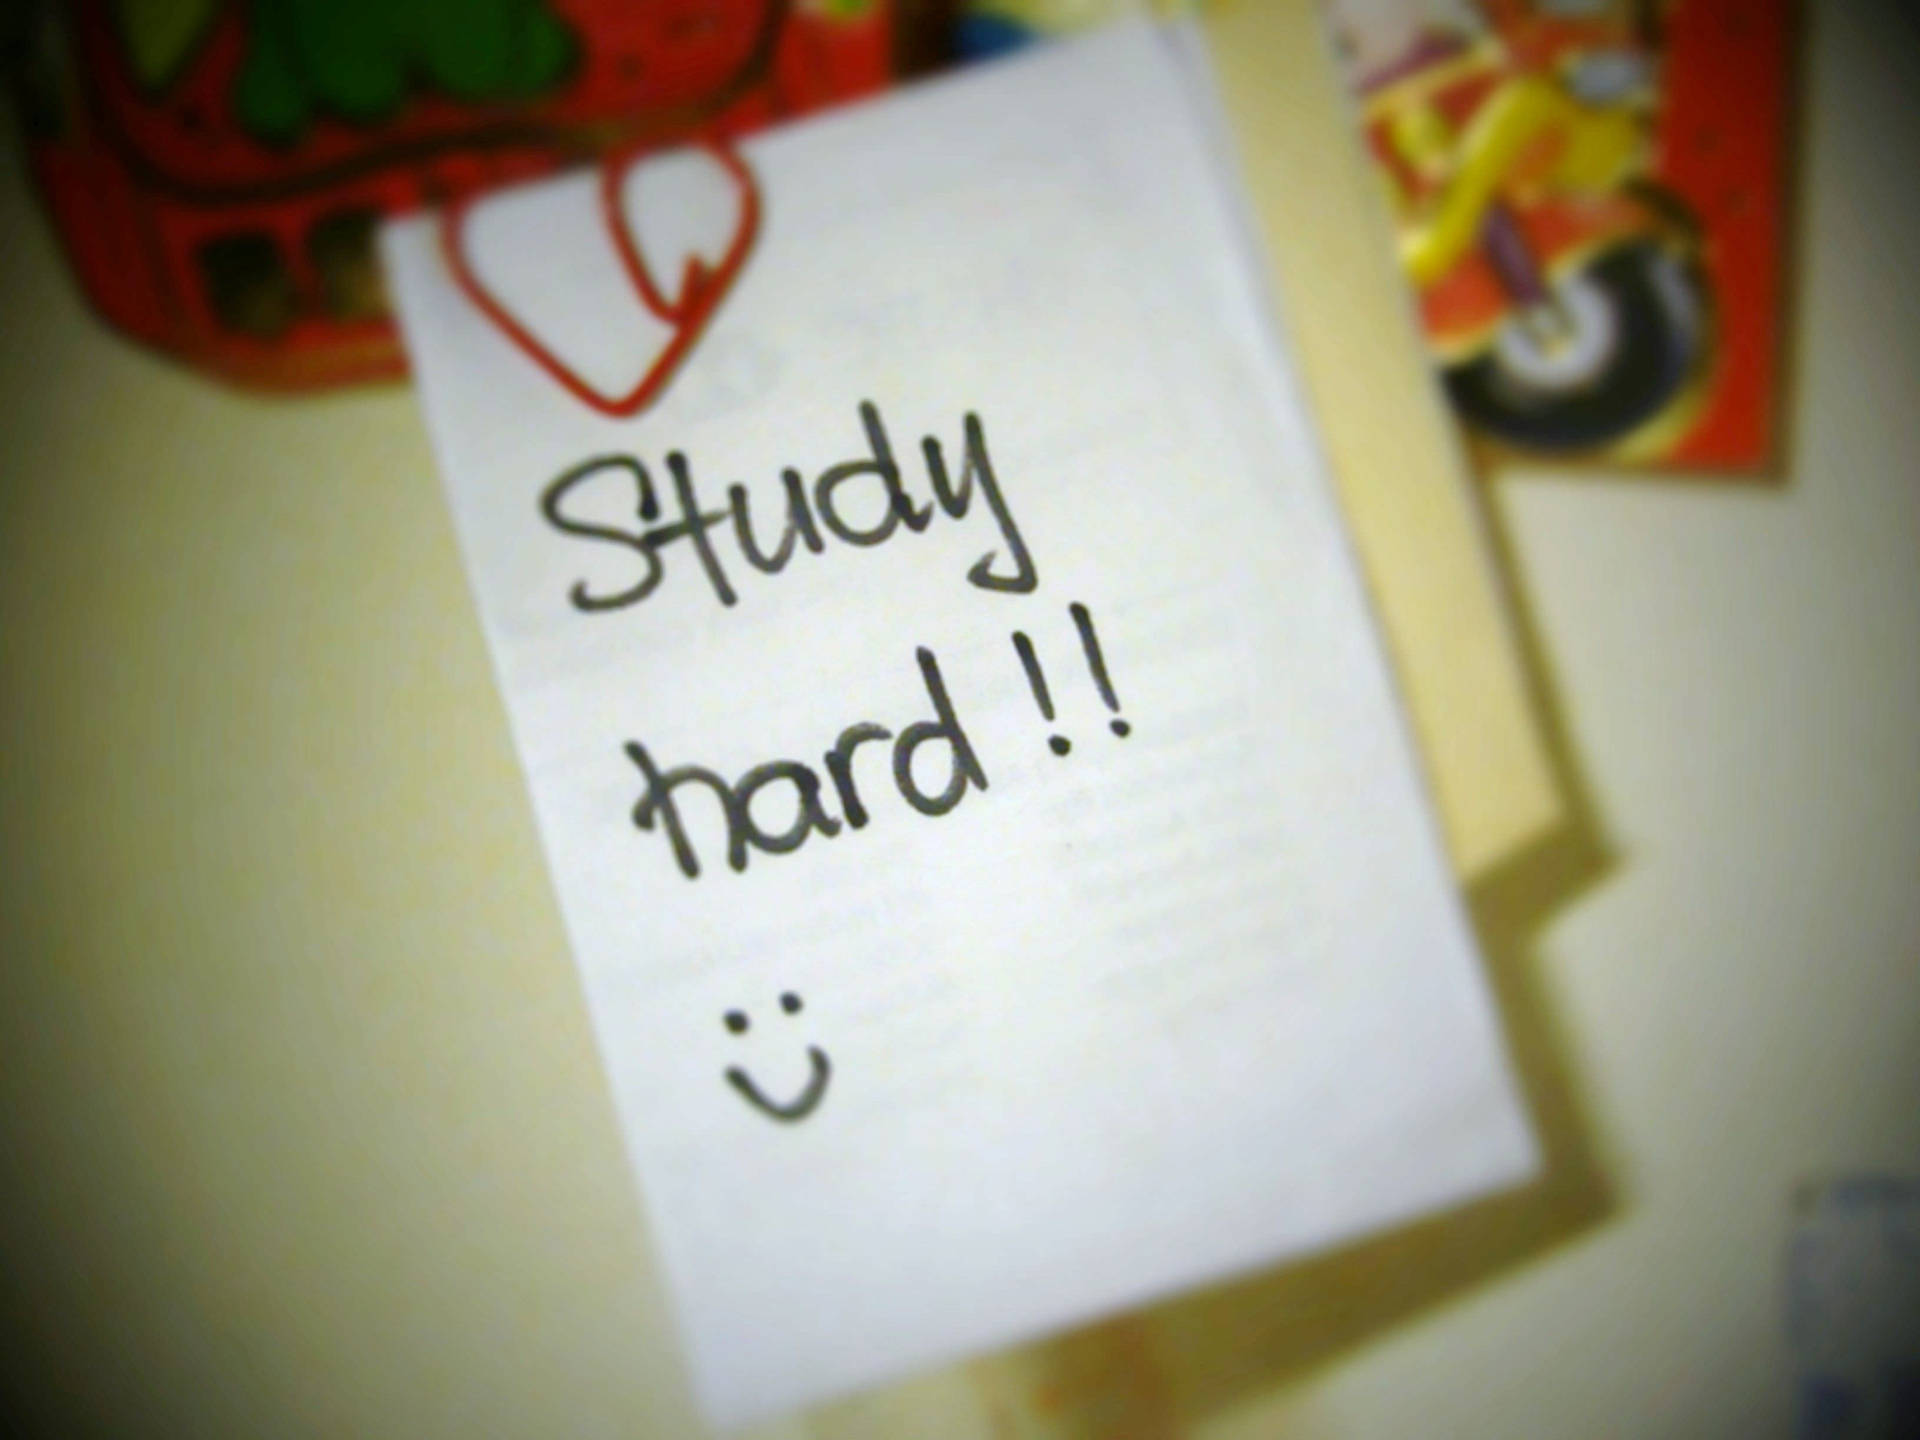 Motivational Study Hard Quote Wallpaper